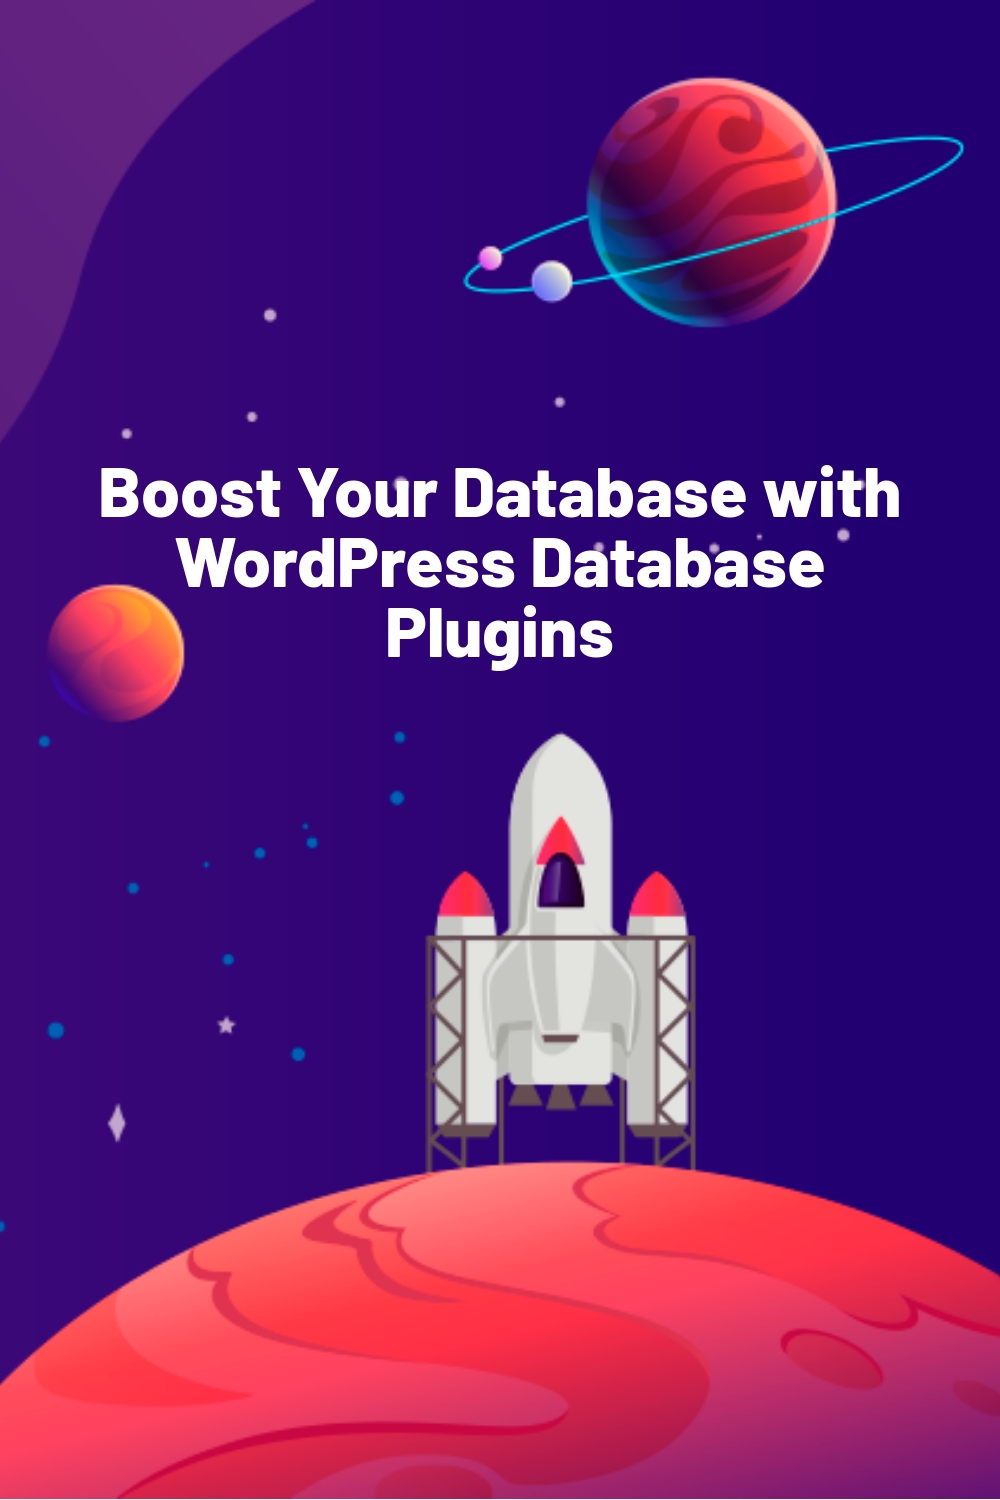 Boost Your Database with WordPress Database Plugins